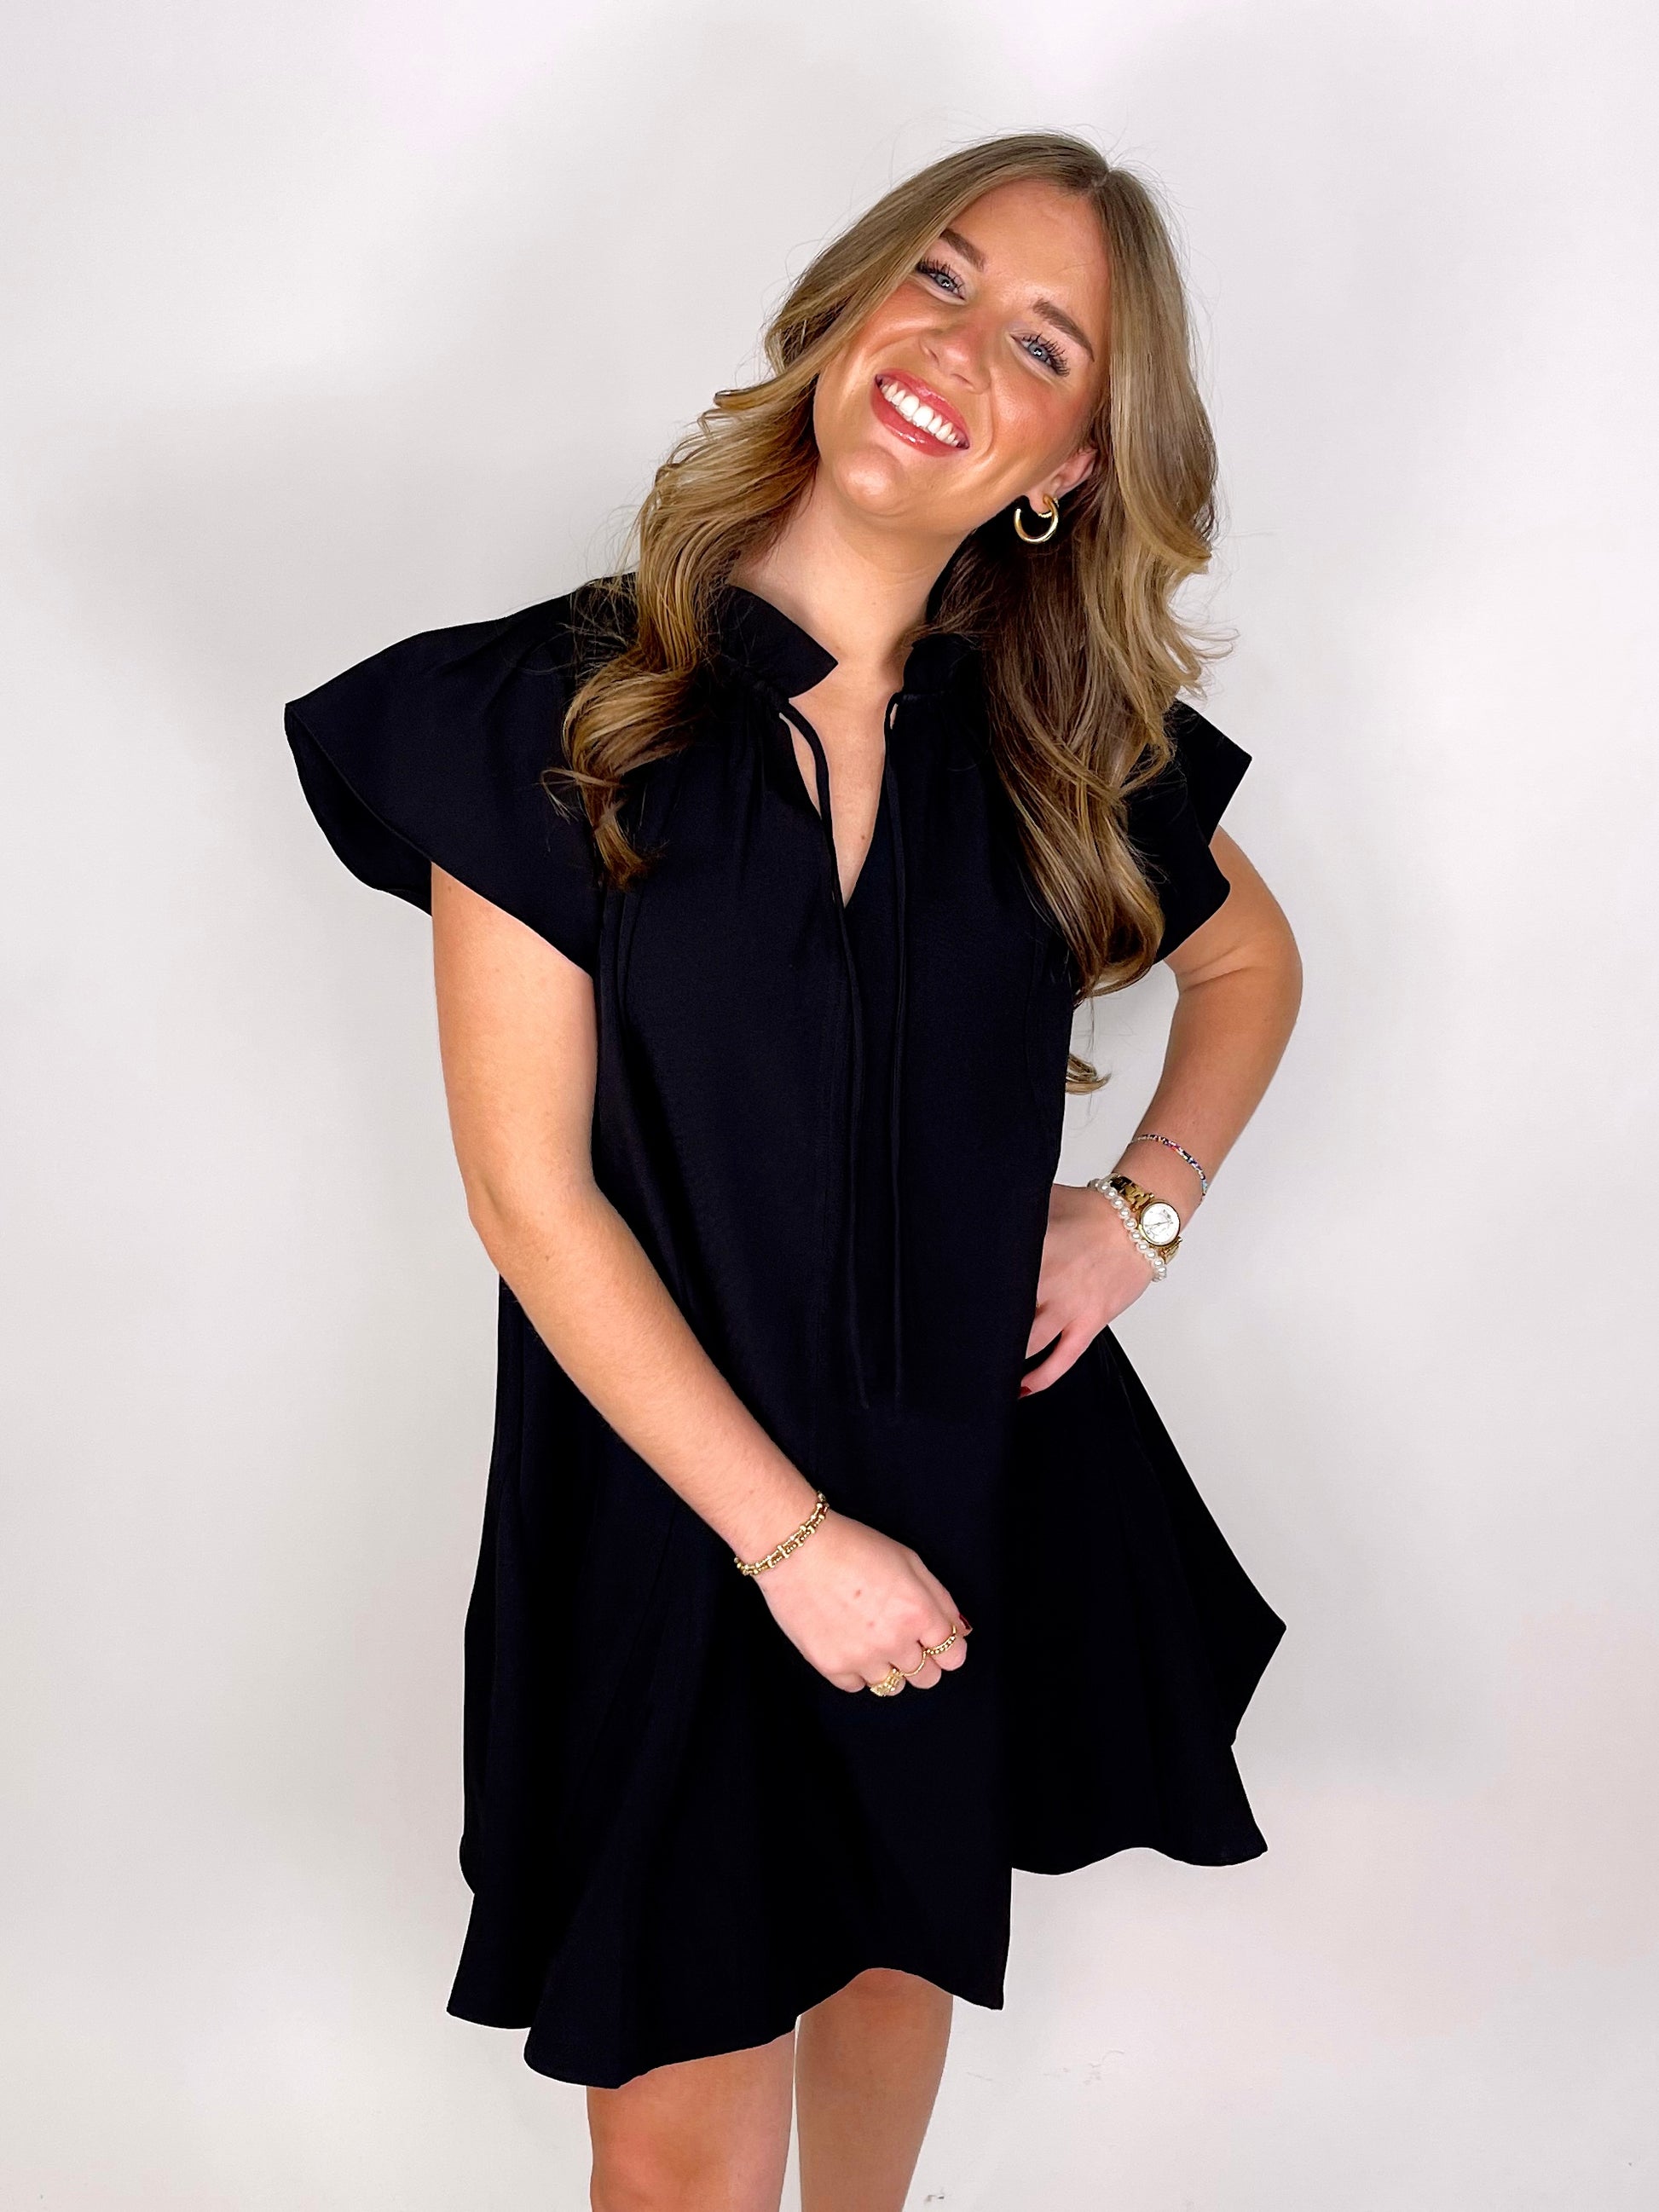 The Hallie Dress-Mini Dress-THML-The Village Shoppe, Women’s Fashion Boutique, Shop Online and In Store - Located in Muscle Shoals, AL.